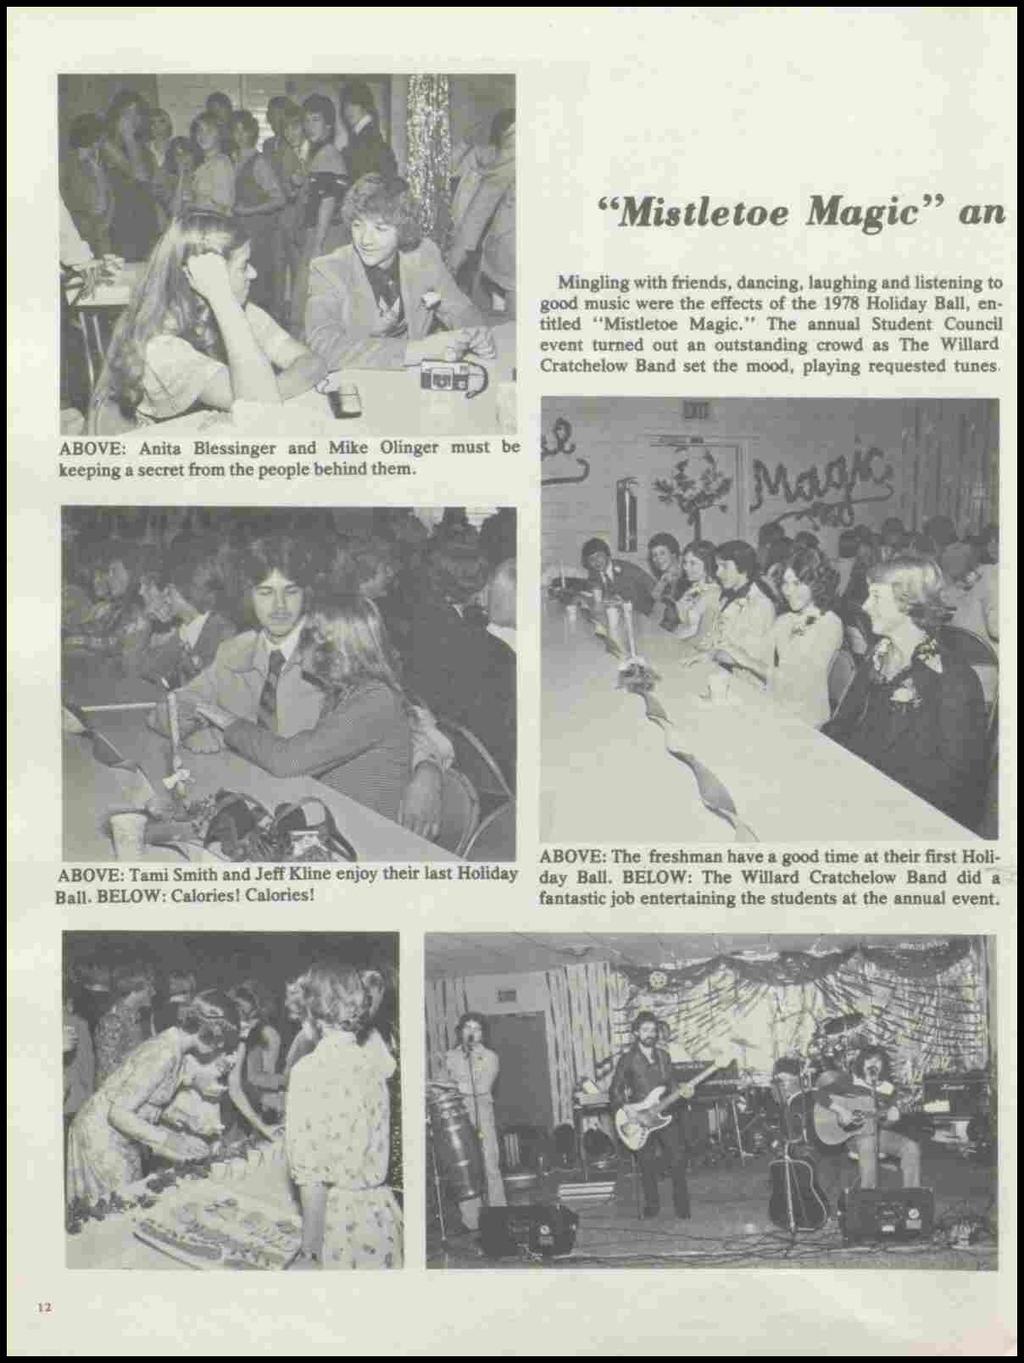 ''Mistletoe Magic'' an Mingling with friends, dancing, laughing and listening to good music were the effects of the 1978 Holiday Ball, entitled "Mistletoe Magic.